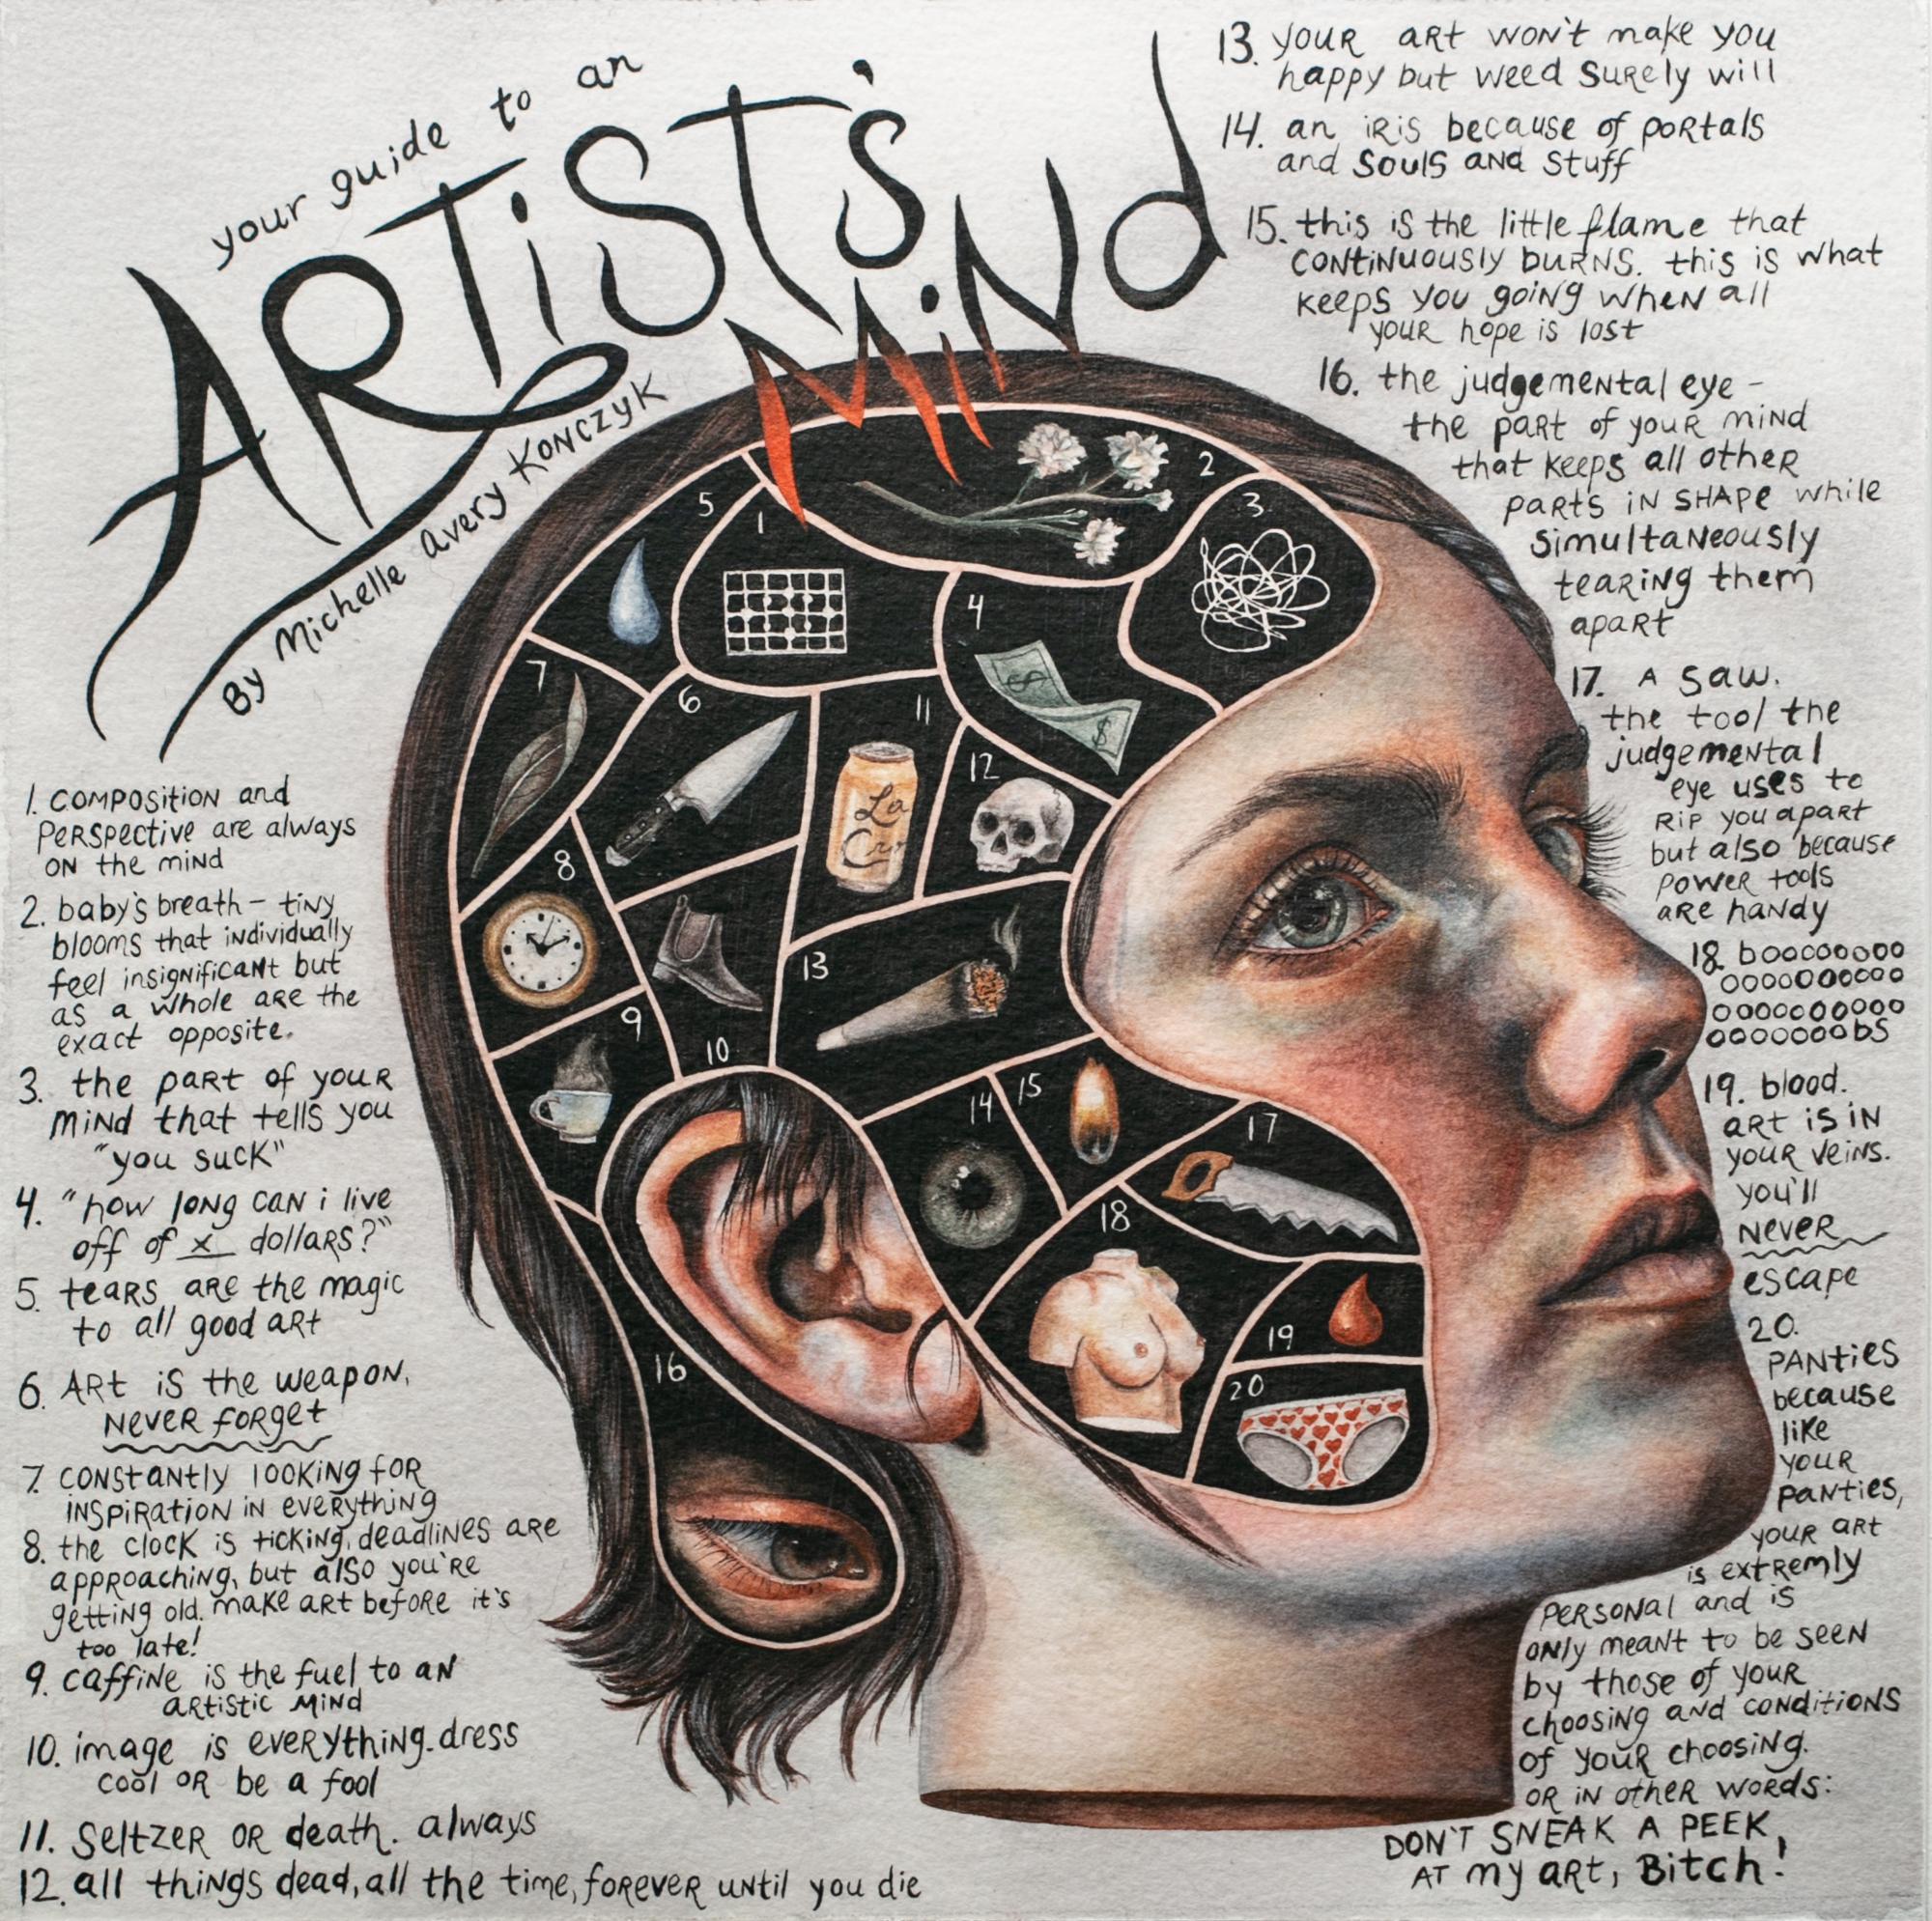 Michelle Avery Konczyk Figurative Art - "Your Guide to an Artist's Mind", Watercolor Painting, Figurative, Text